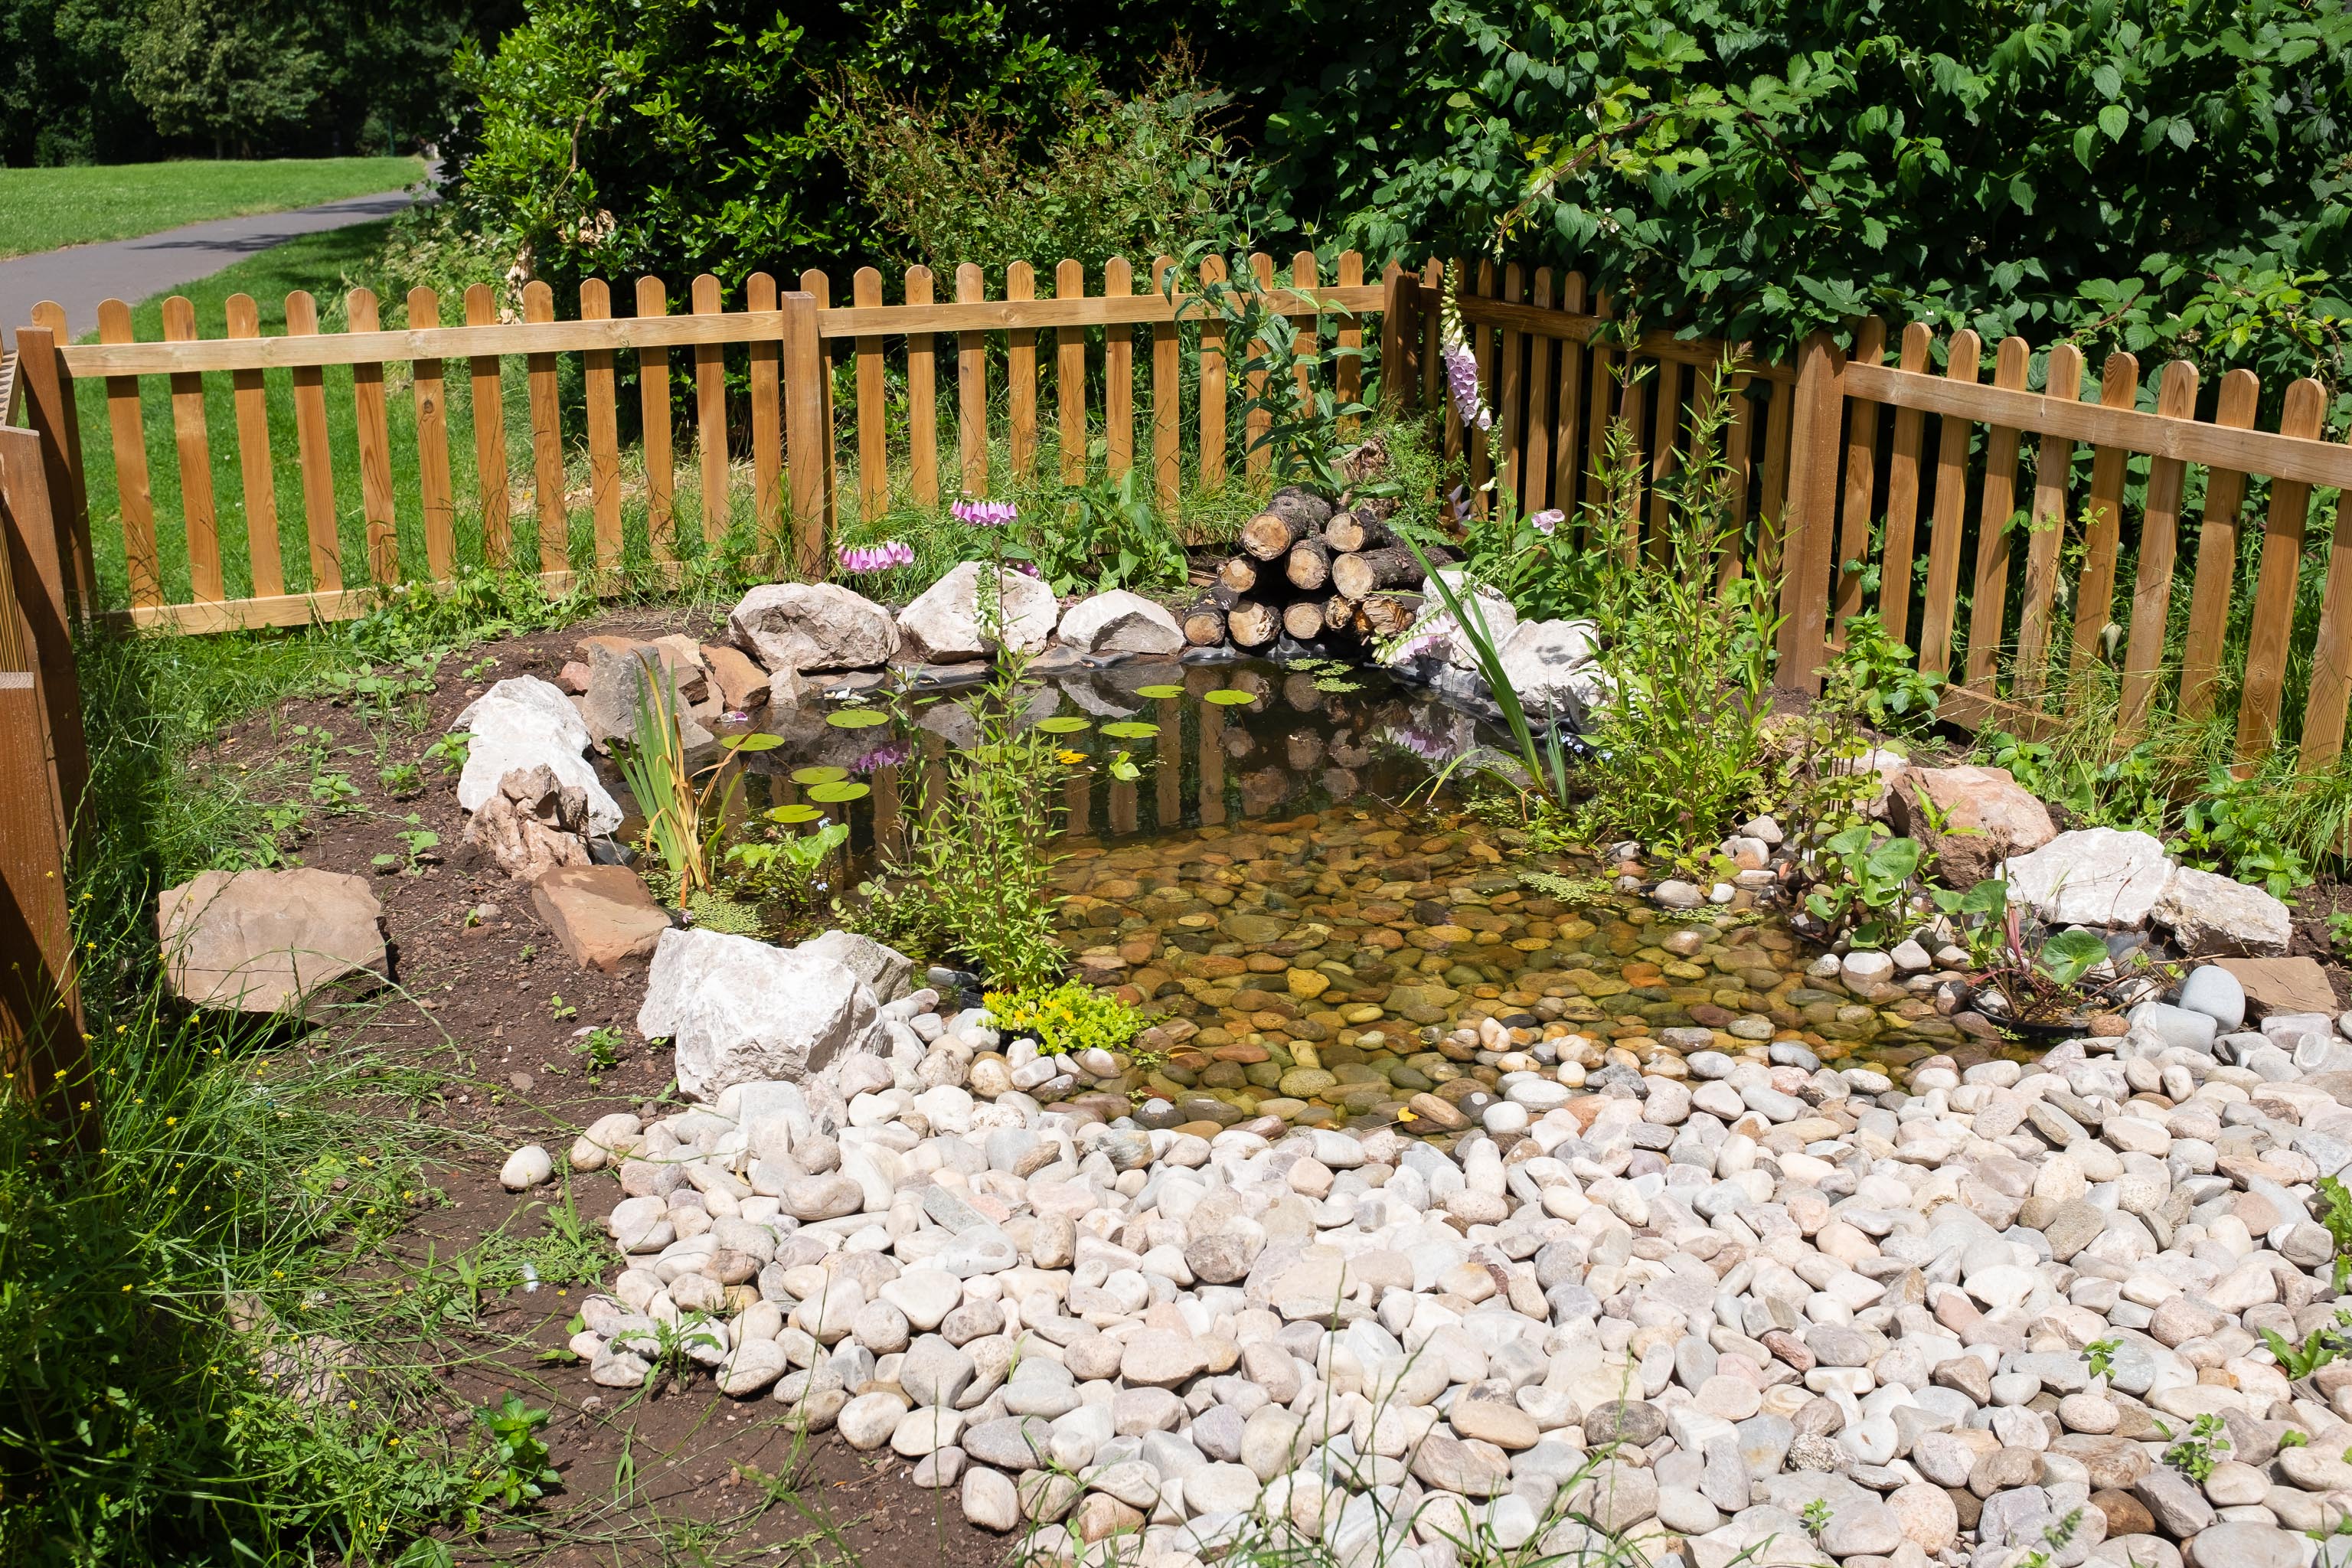 Pond 1
When I passed the (then-empty) fencing back in March I wondered what this would turn out to be. I had no idea it would be a miniature nature reserv...